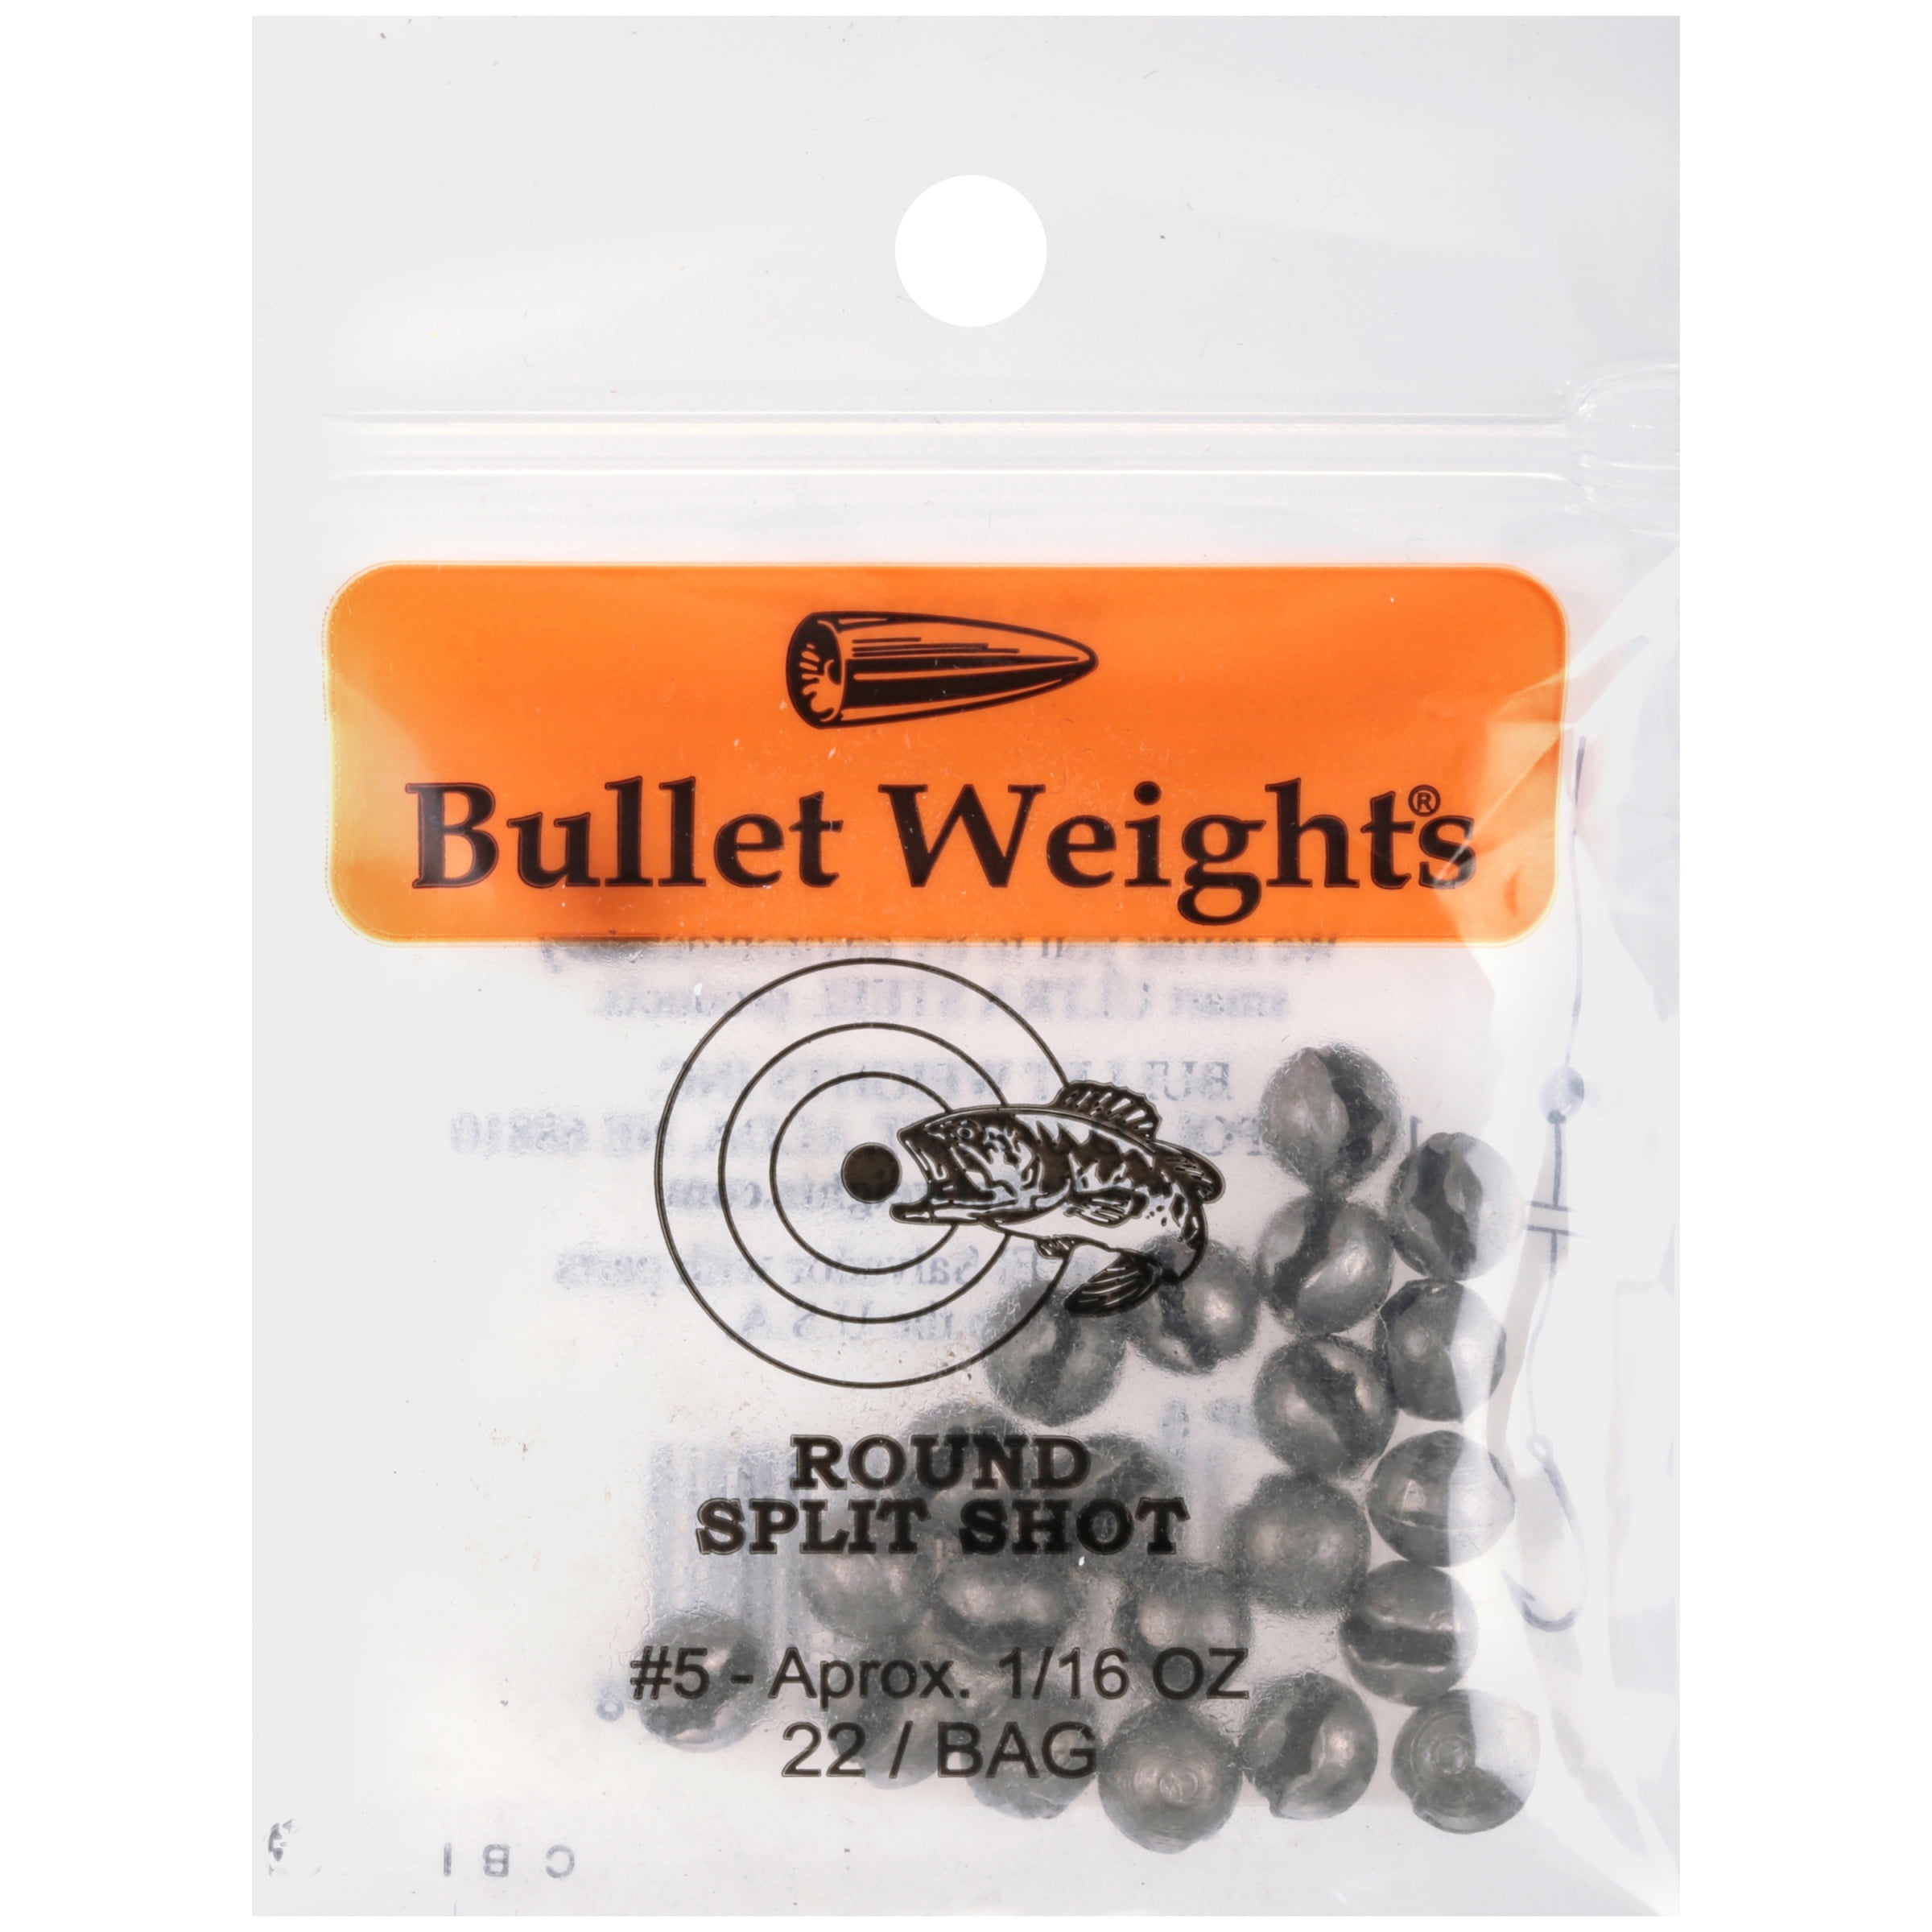 Bullet Weights® SP5-24 Lead Round Split Shot Size 5 Fishing Weight